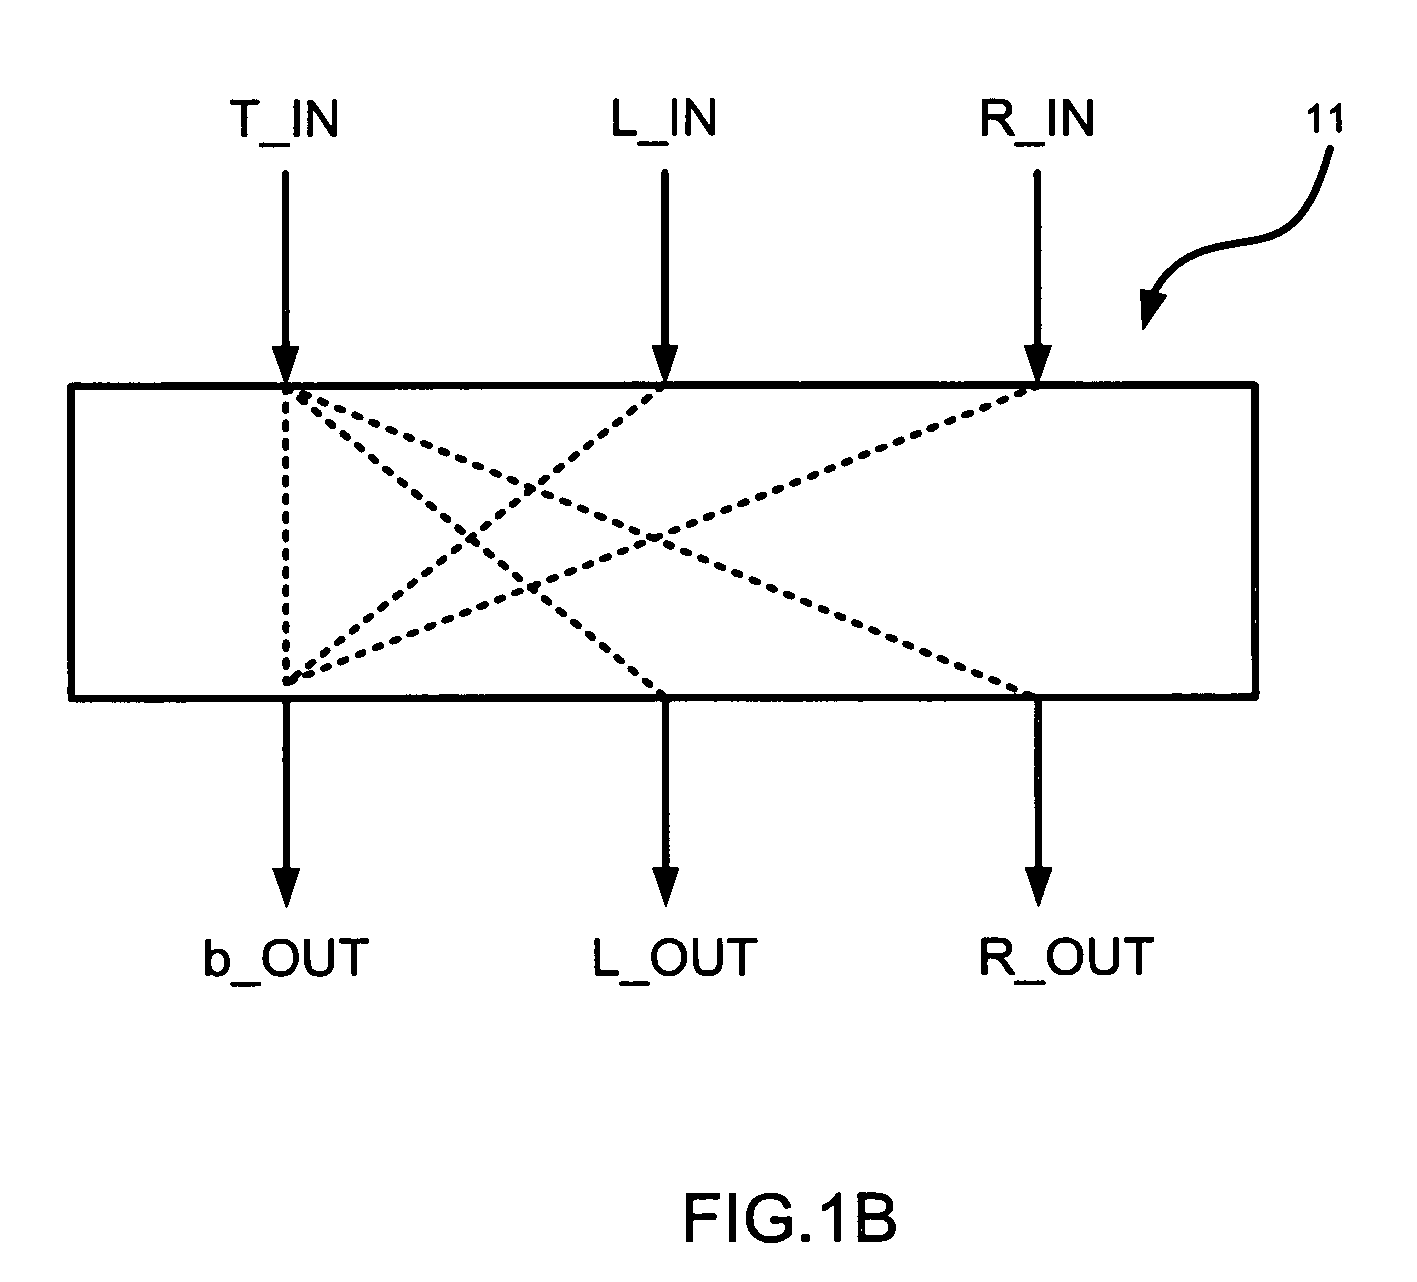 Circuit of on-chip network having four-node ring switch structure